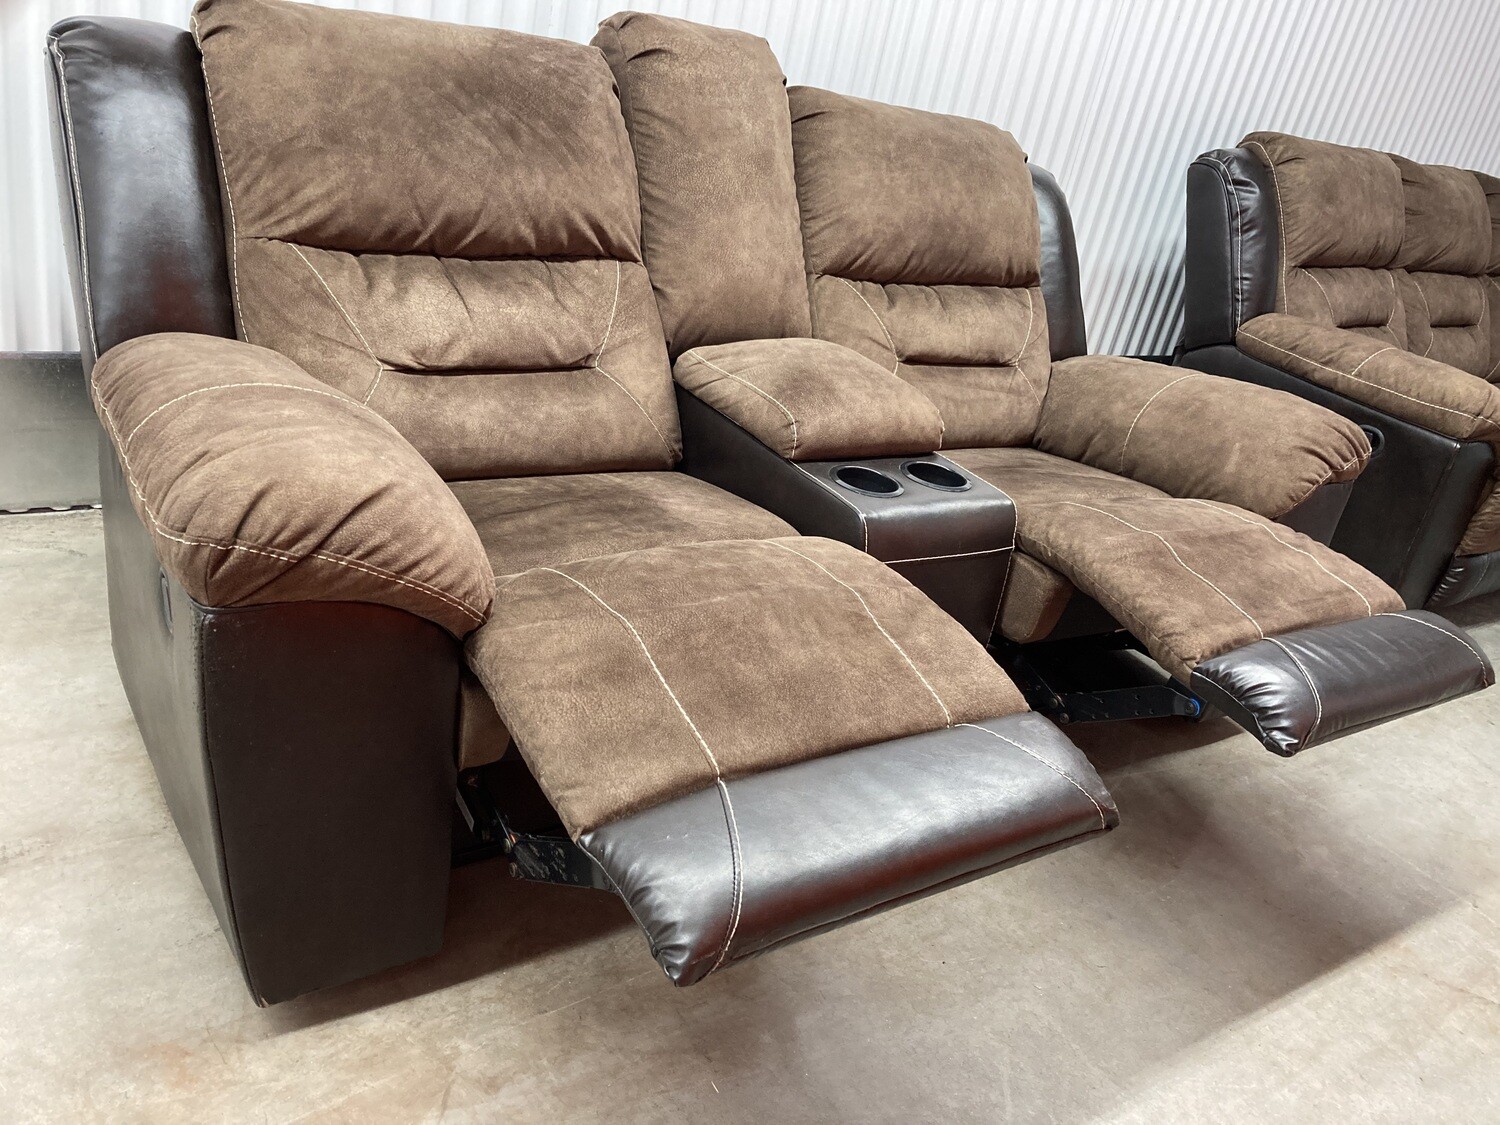 Wall-hugger Reclining Loveseat, brown fabric & faux leather #1337